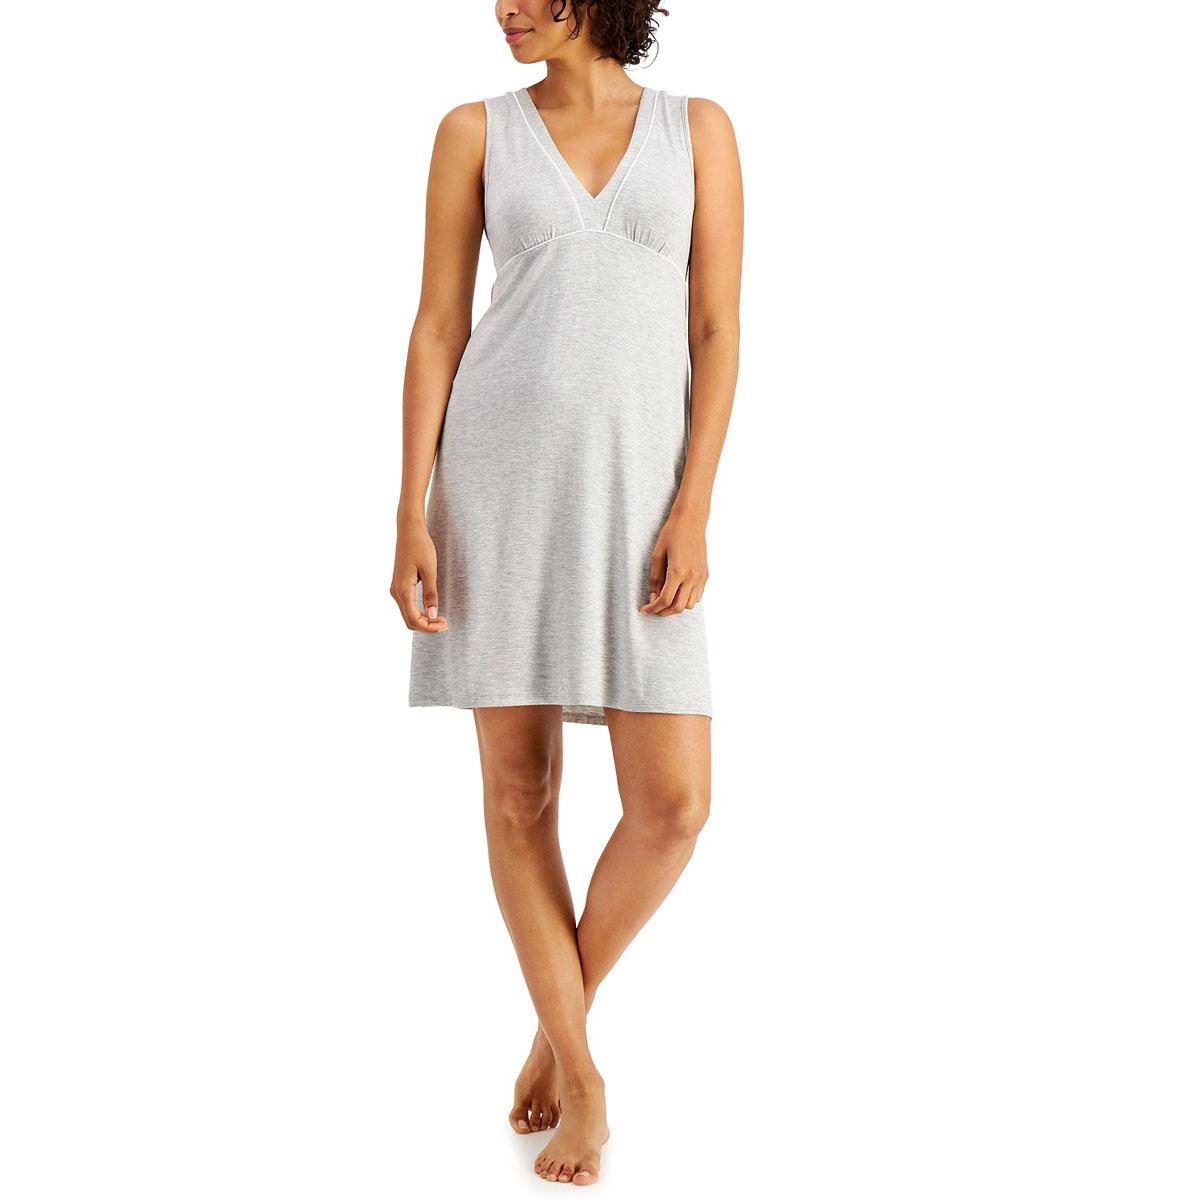 Alfani Super-Soft Piping Chemise Nightgown for $8.86